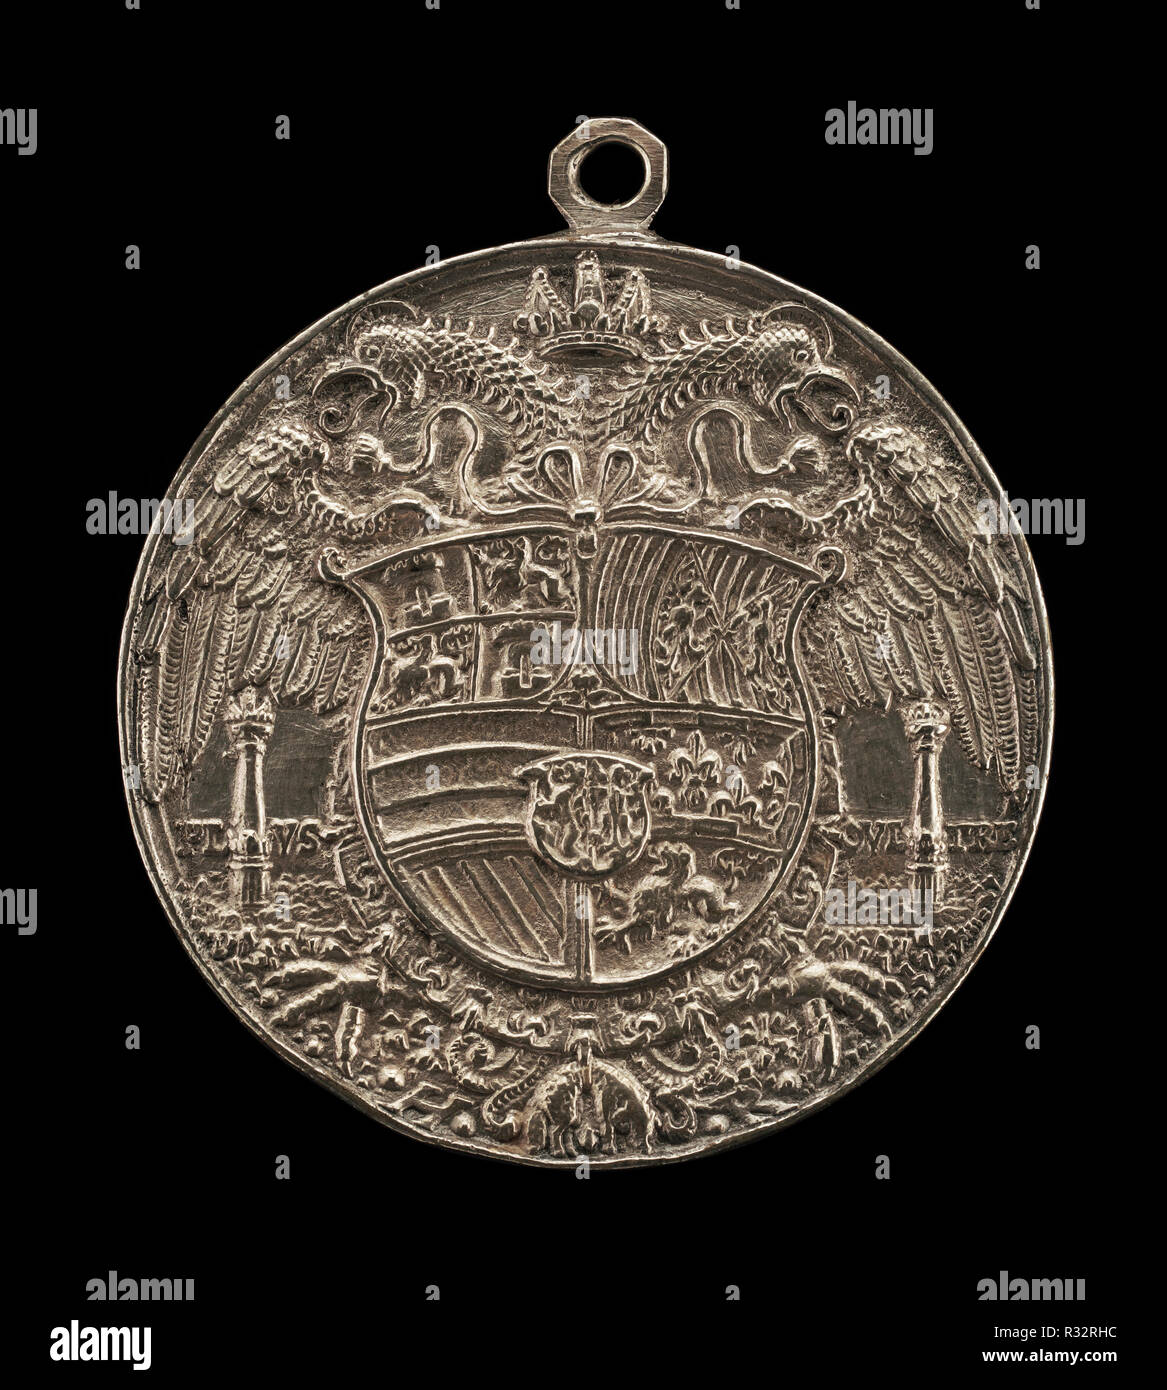 Double-headed Eagle, Charged with Shield [reverse]. Dated: 1537. Dimensions: overall (height with suspension loop): 7.16 cm (2 13/16 in.)  overall (diameter without loop): 6.38 cm (2 1/2 in.)  gross weight: 58.31 gr (0.129 lb.)  axis: 12:00. Medium: silver//With loop. Museum: National Gallery of Art, Washington DC. Author: Hans Reinhart the Elder. Stock Photo